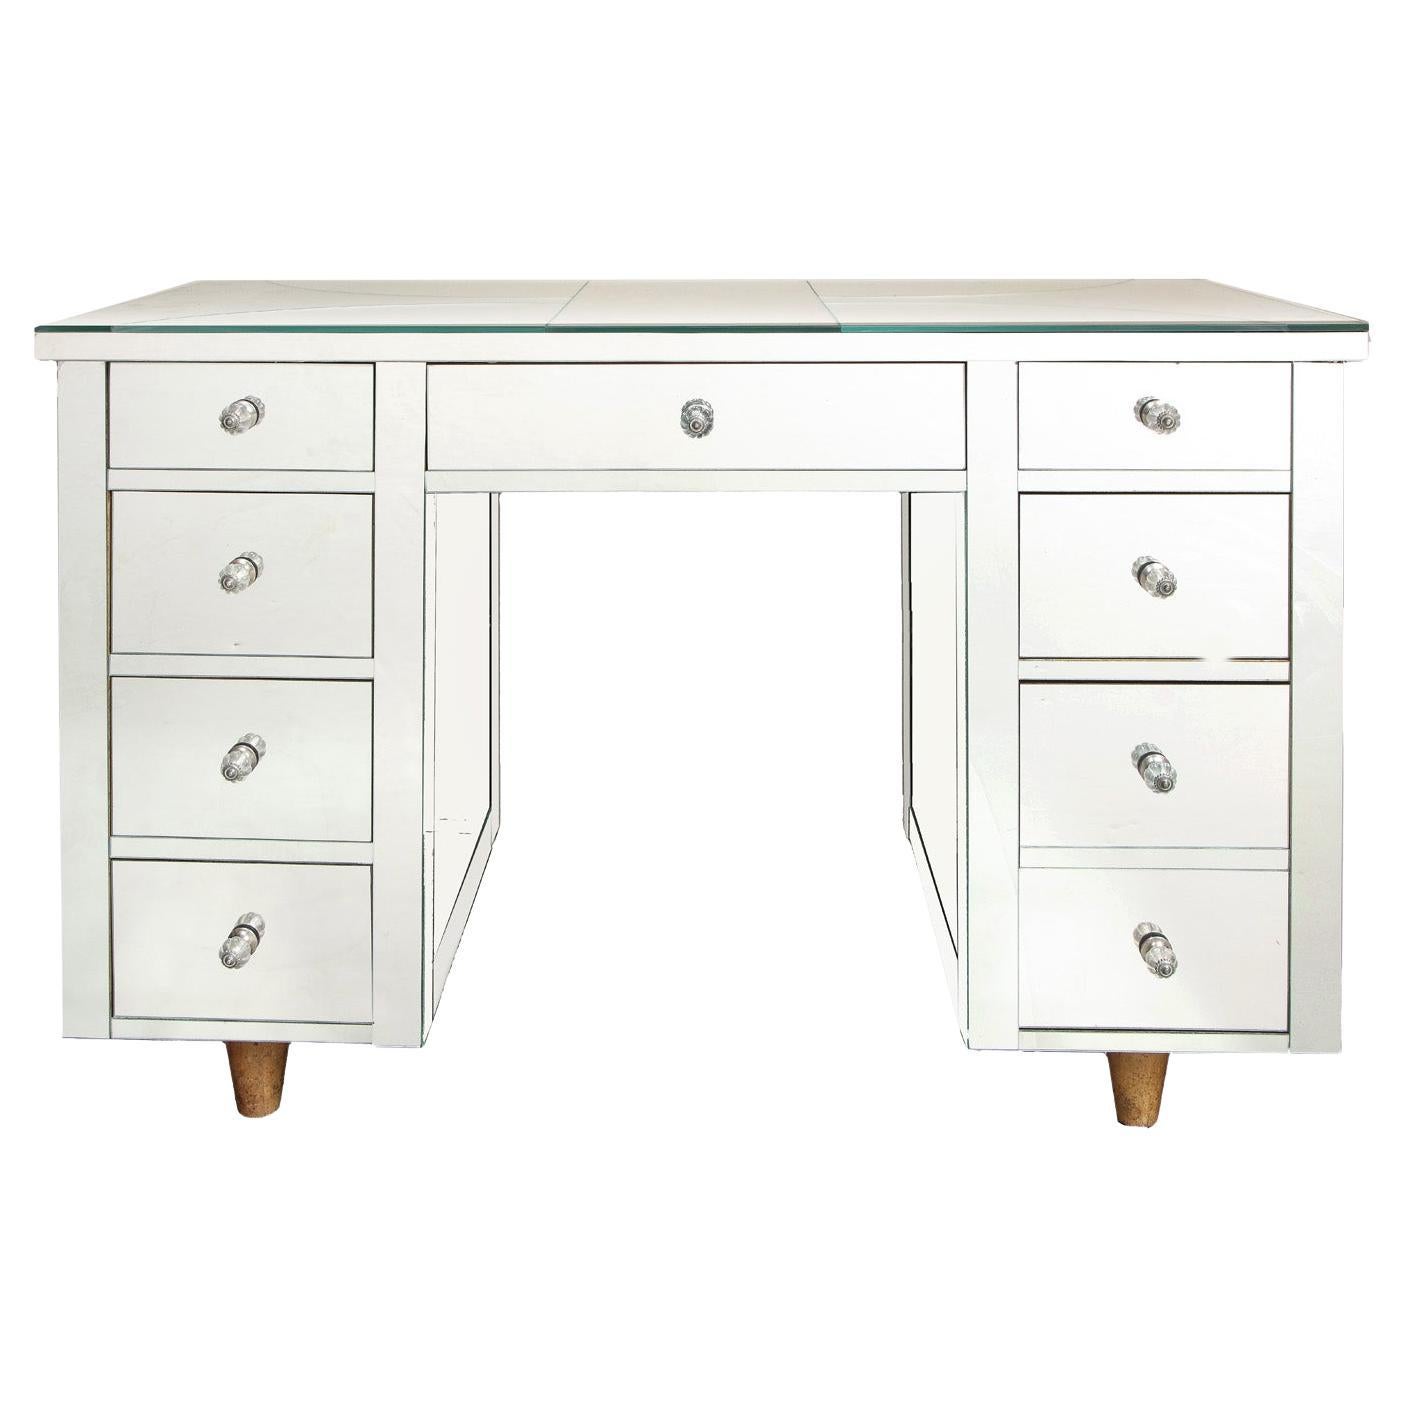 Artisan nine drawer mirrored desk with star motif and conical blond wood legs. American, 1950's